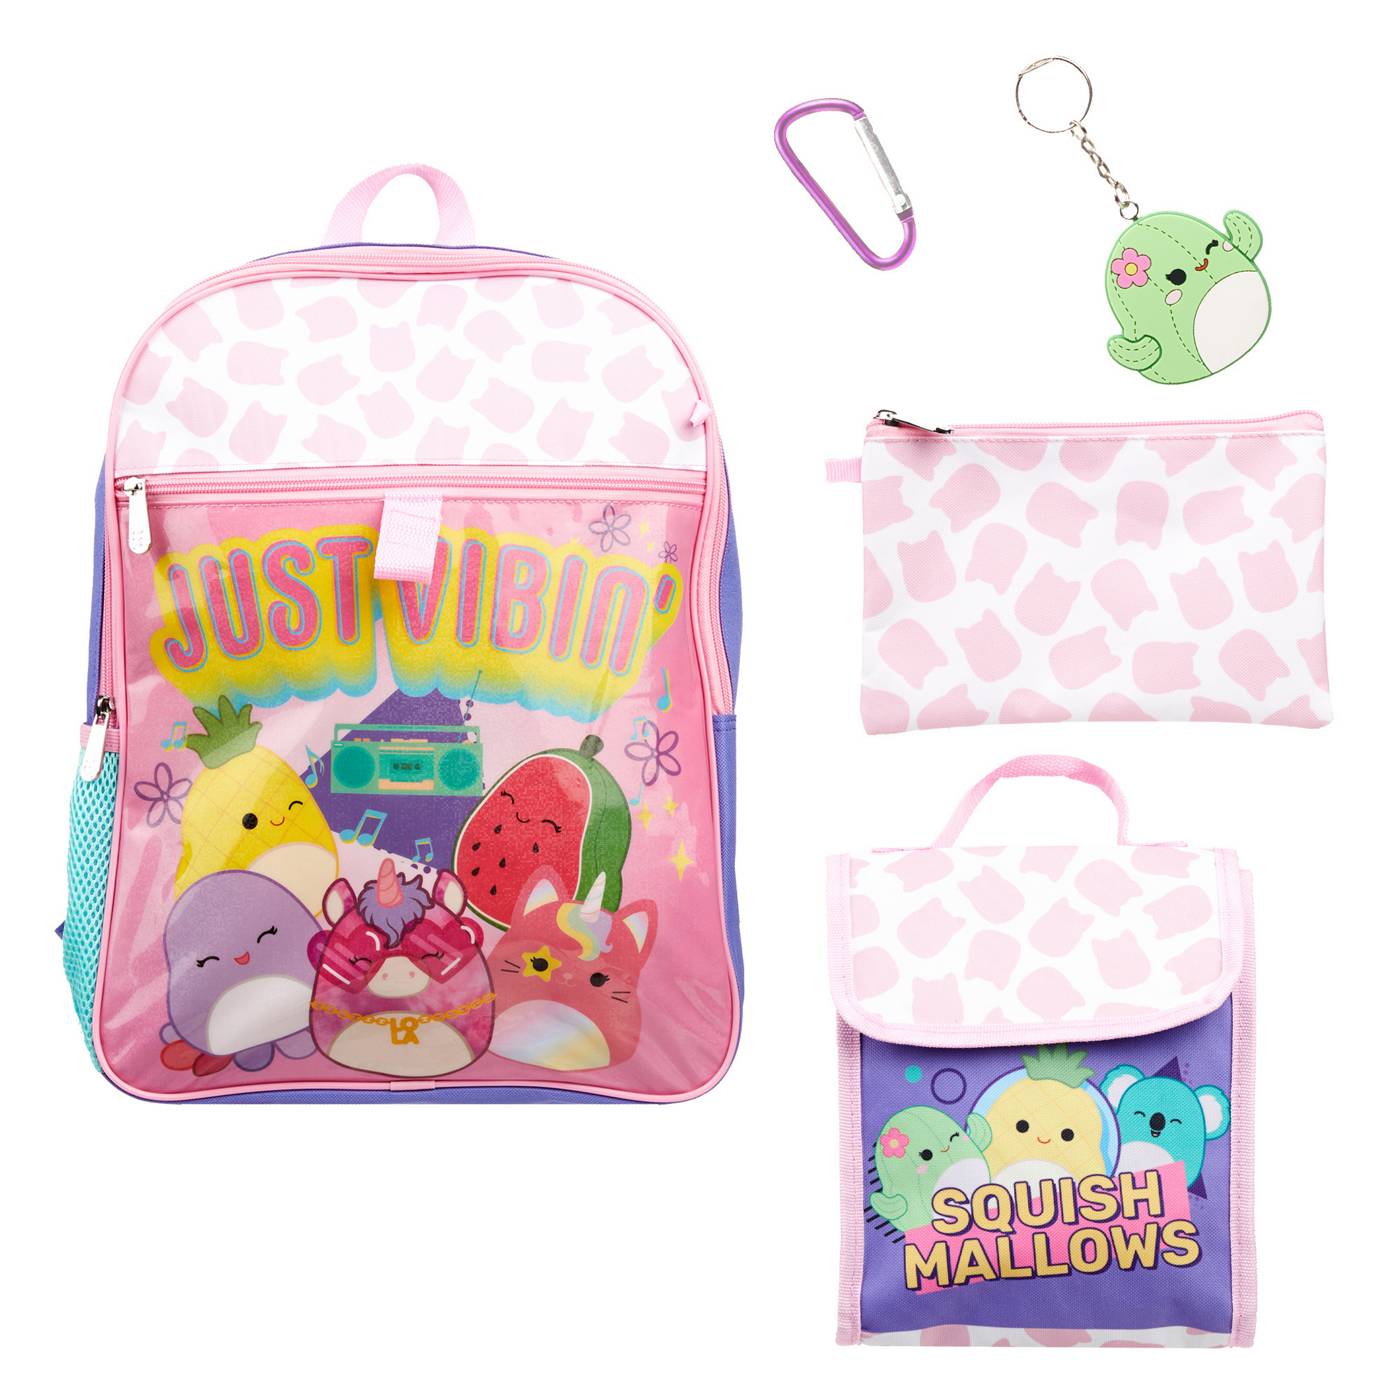 Squishmallows Backpack Set; image 4 of 6